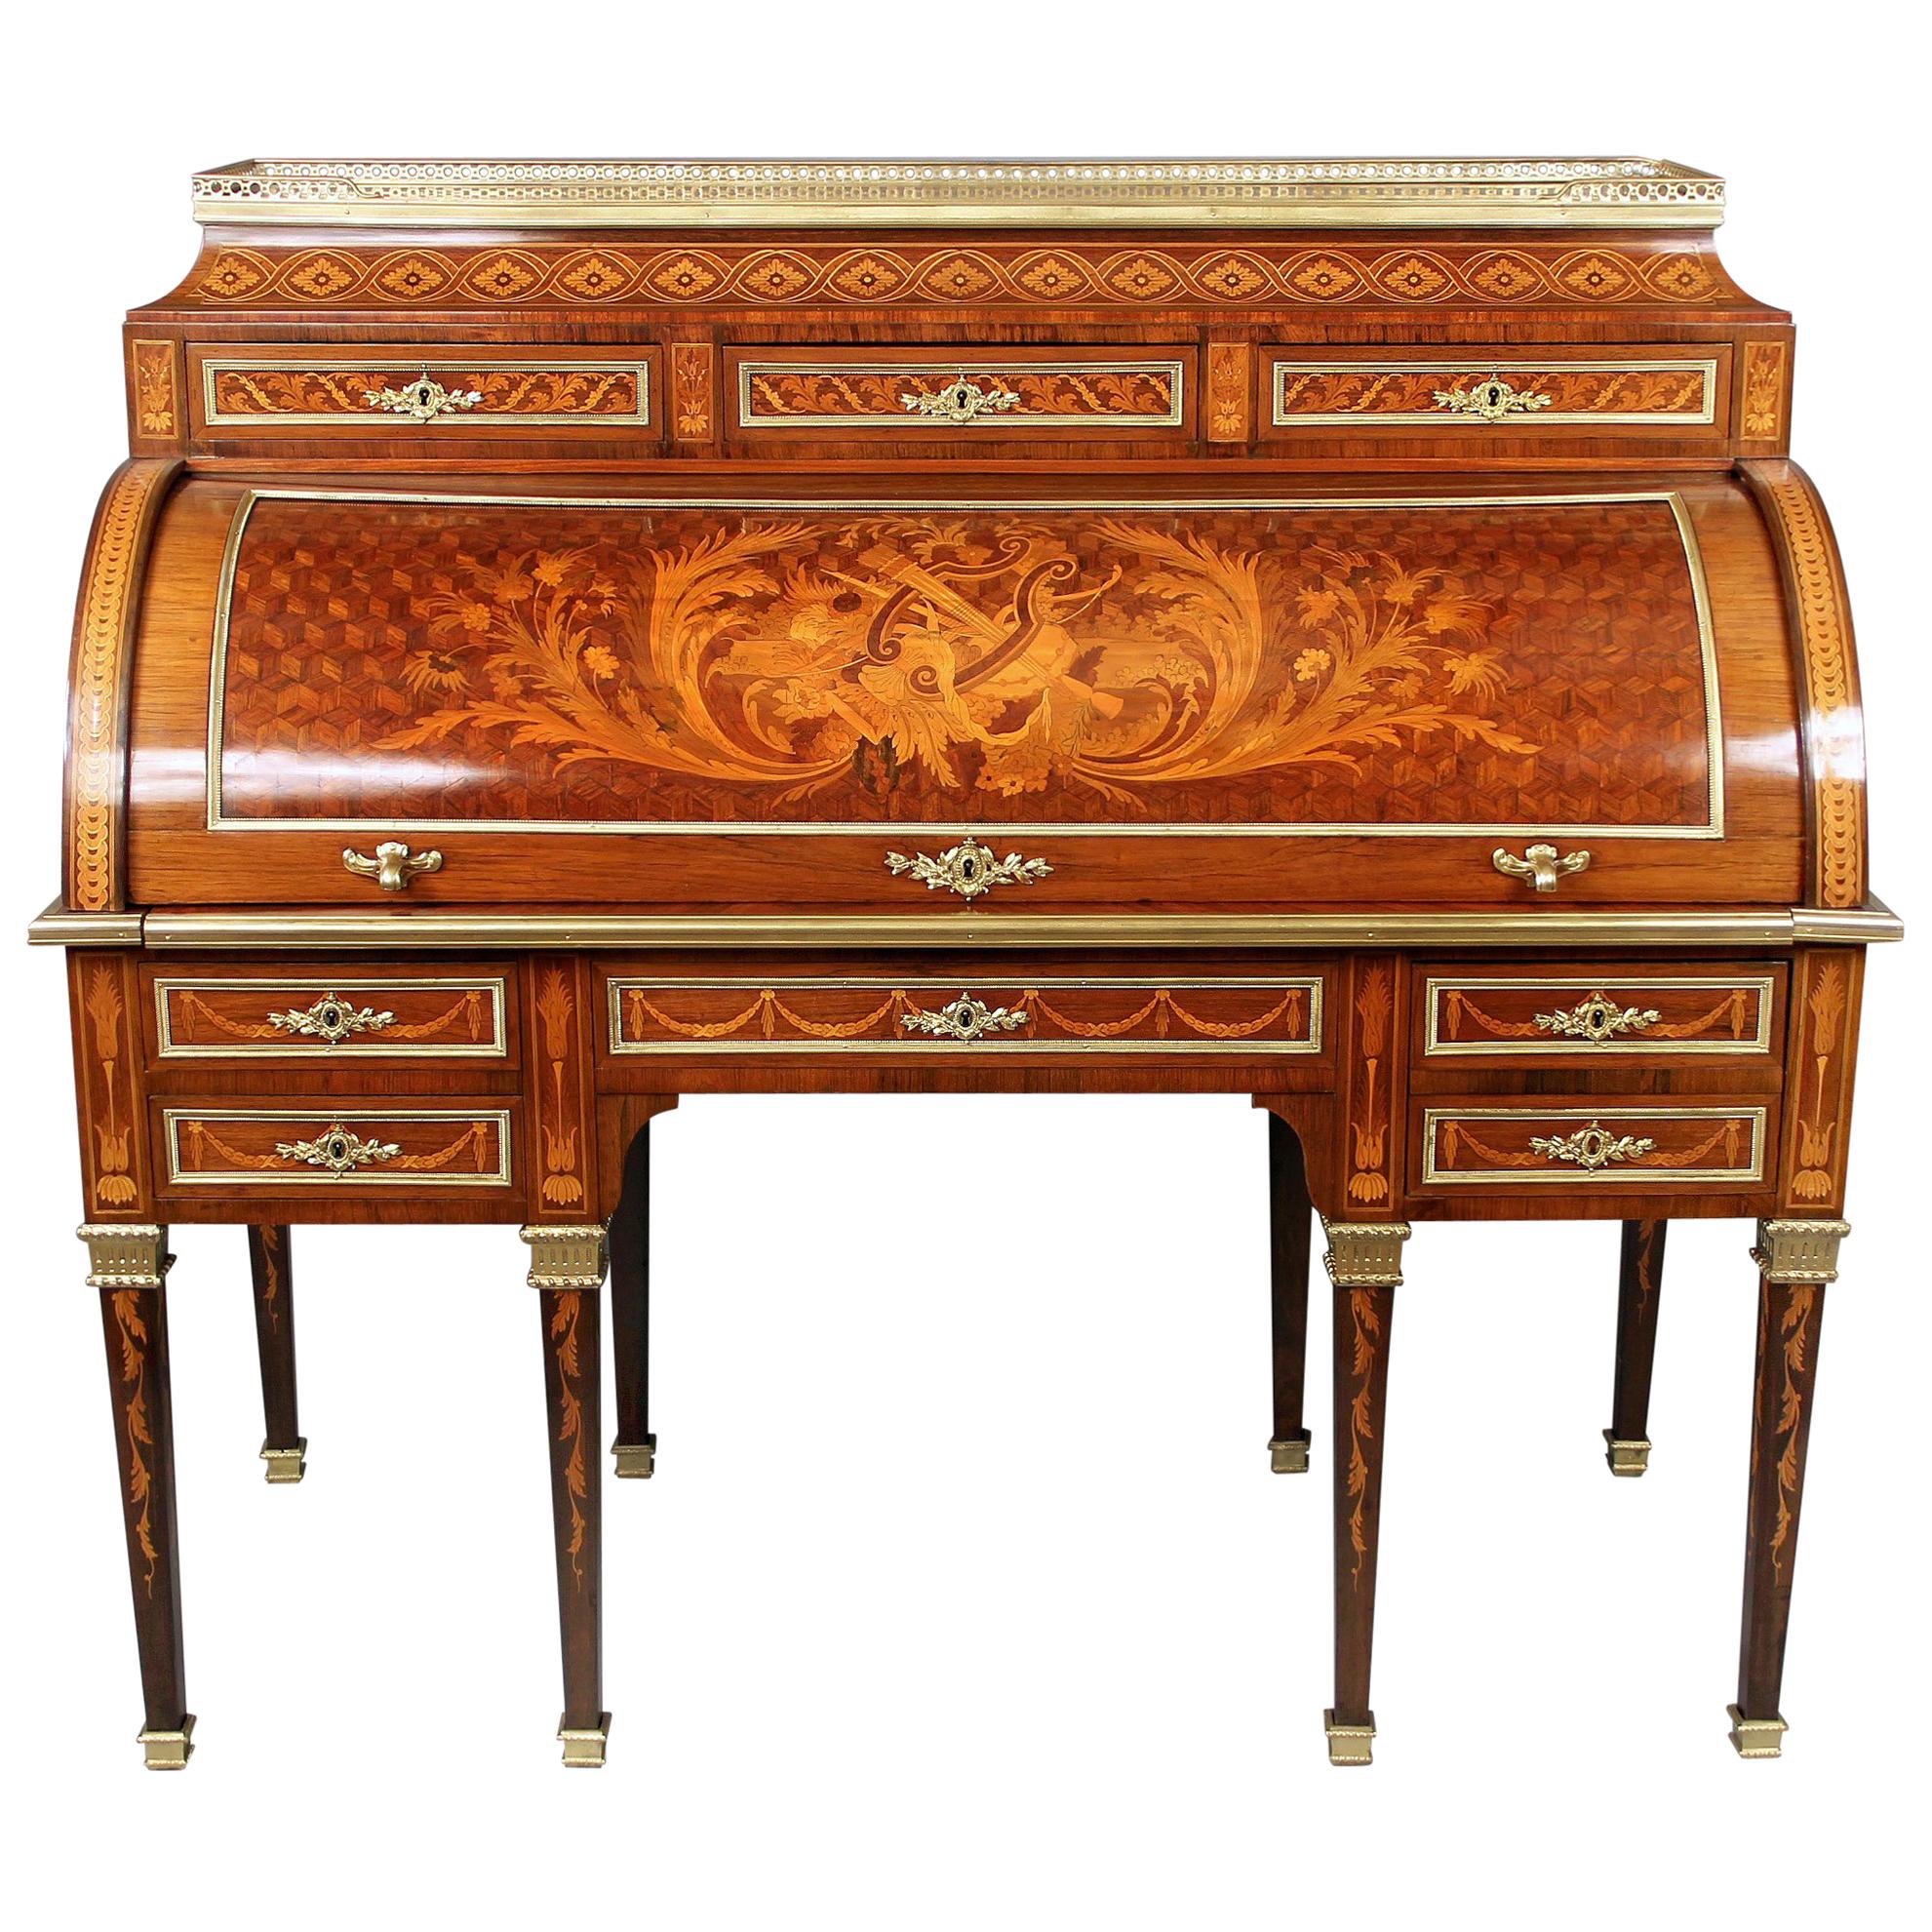 Late 19th Century Gilt Bronze Mounted Inlaid Marquetry Bureau a Cylindre For Sale